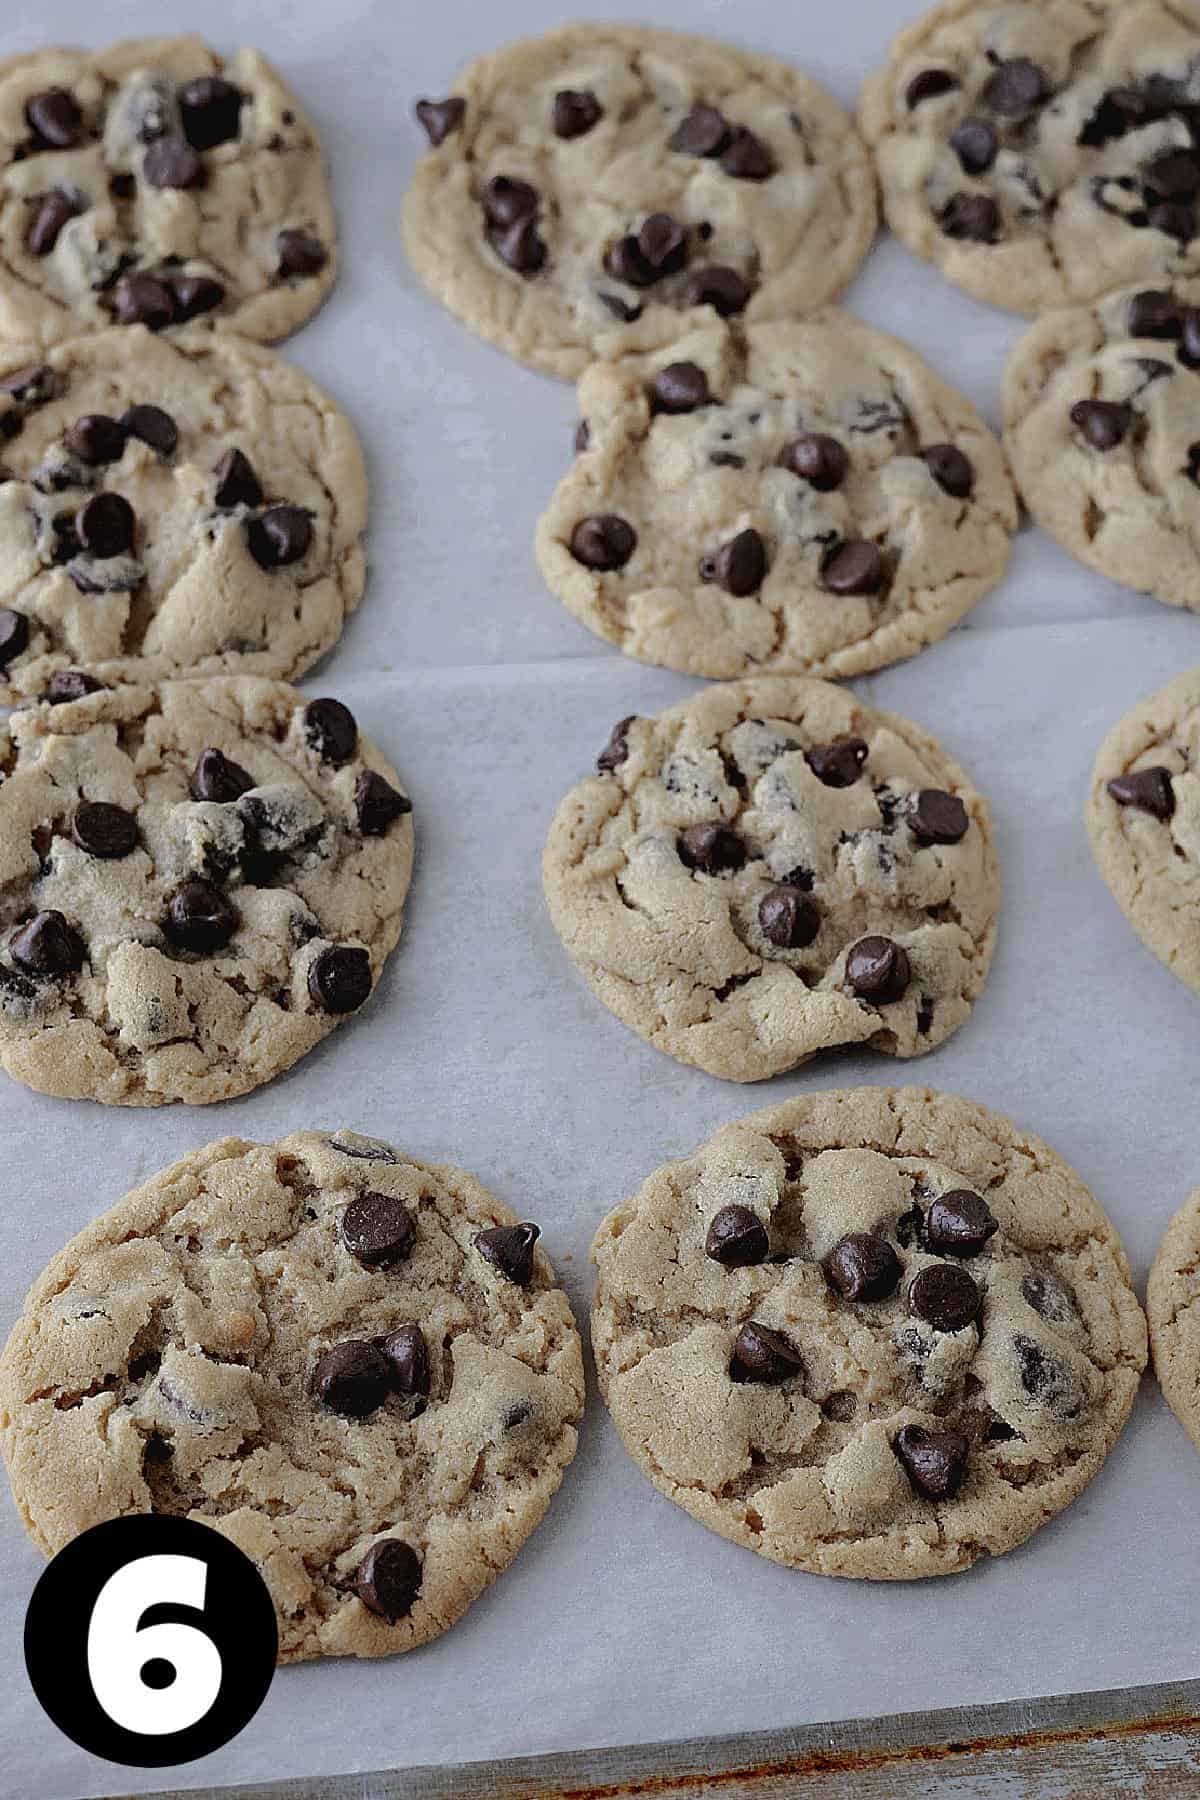 Baked peanut butter chocolate cookies on a parchment lined baking sheet.